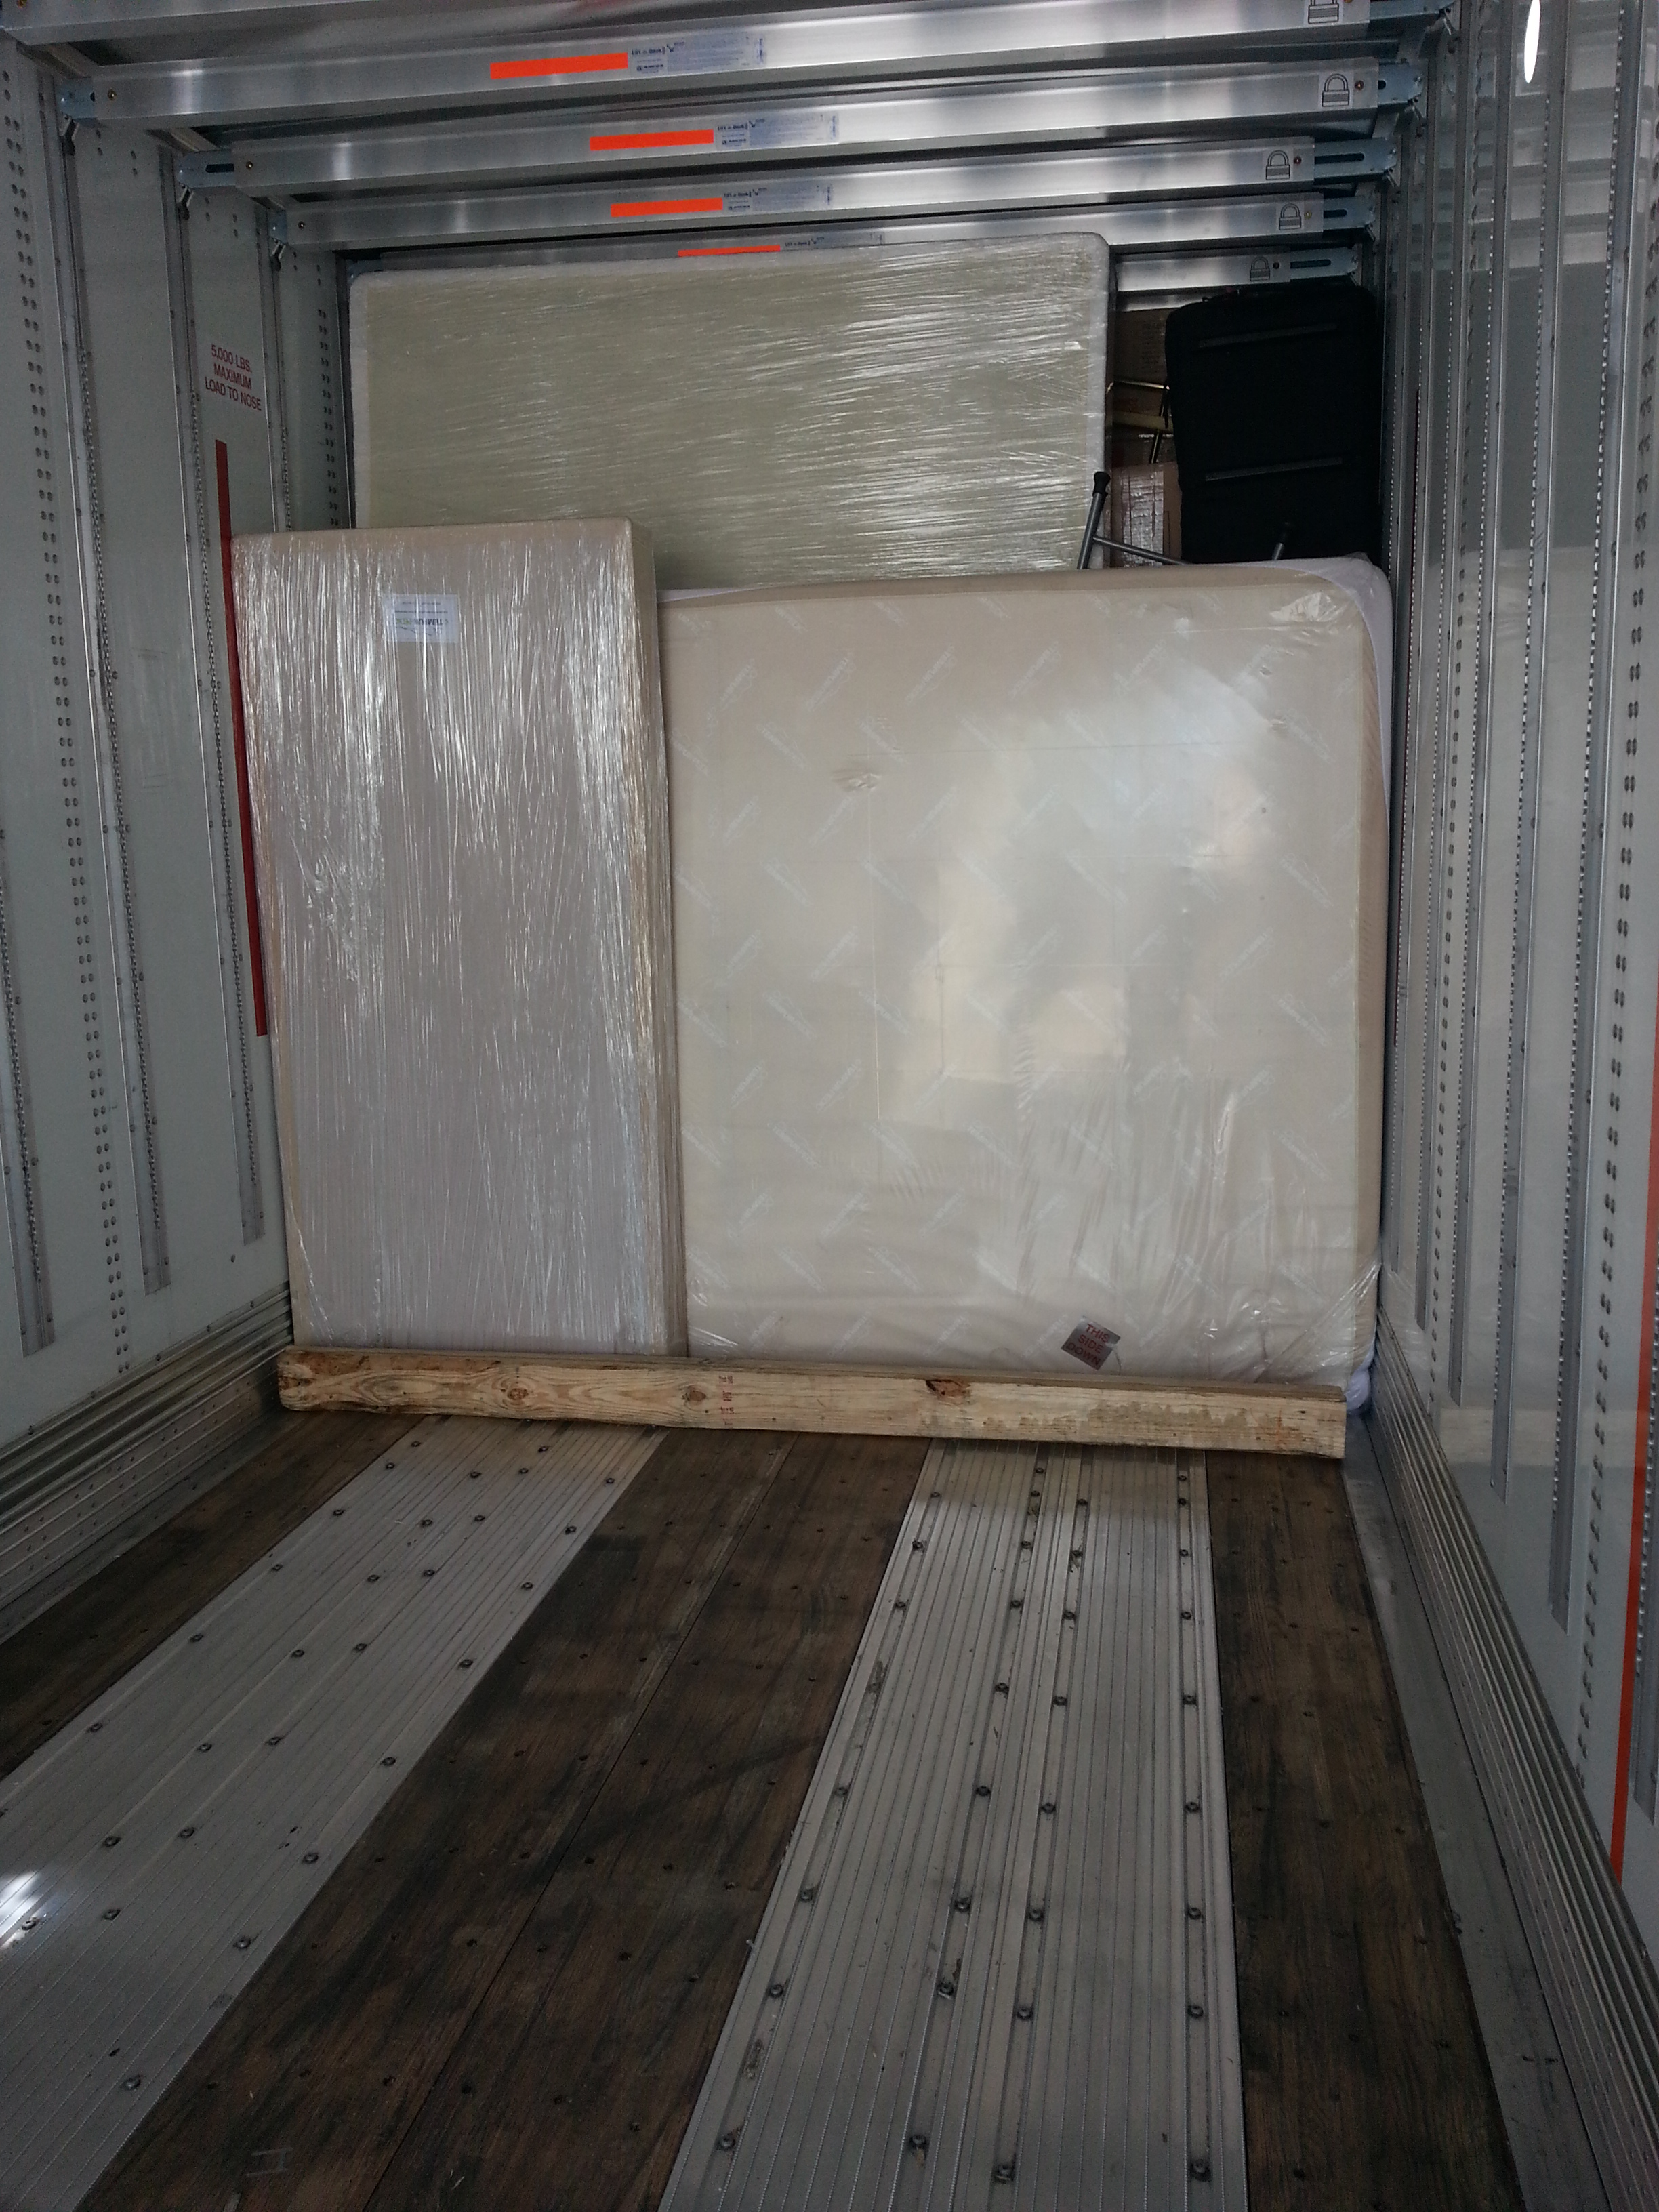 Packing Service, Inc. Loading and Unloading Continers (1)